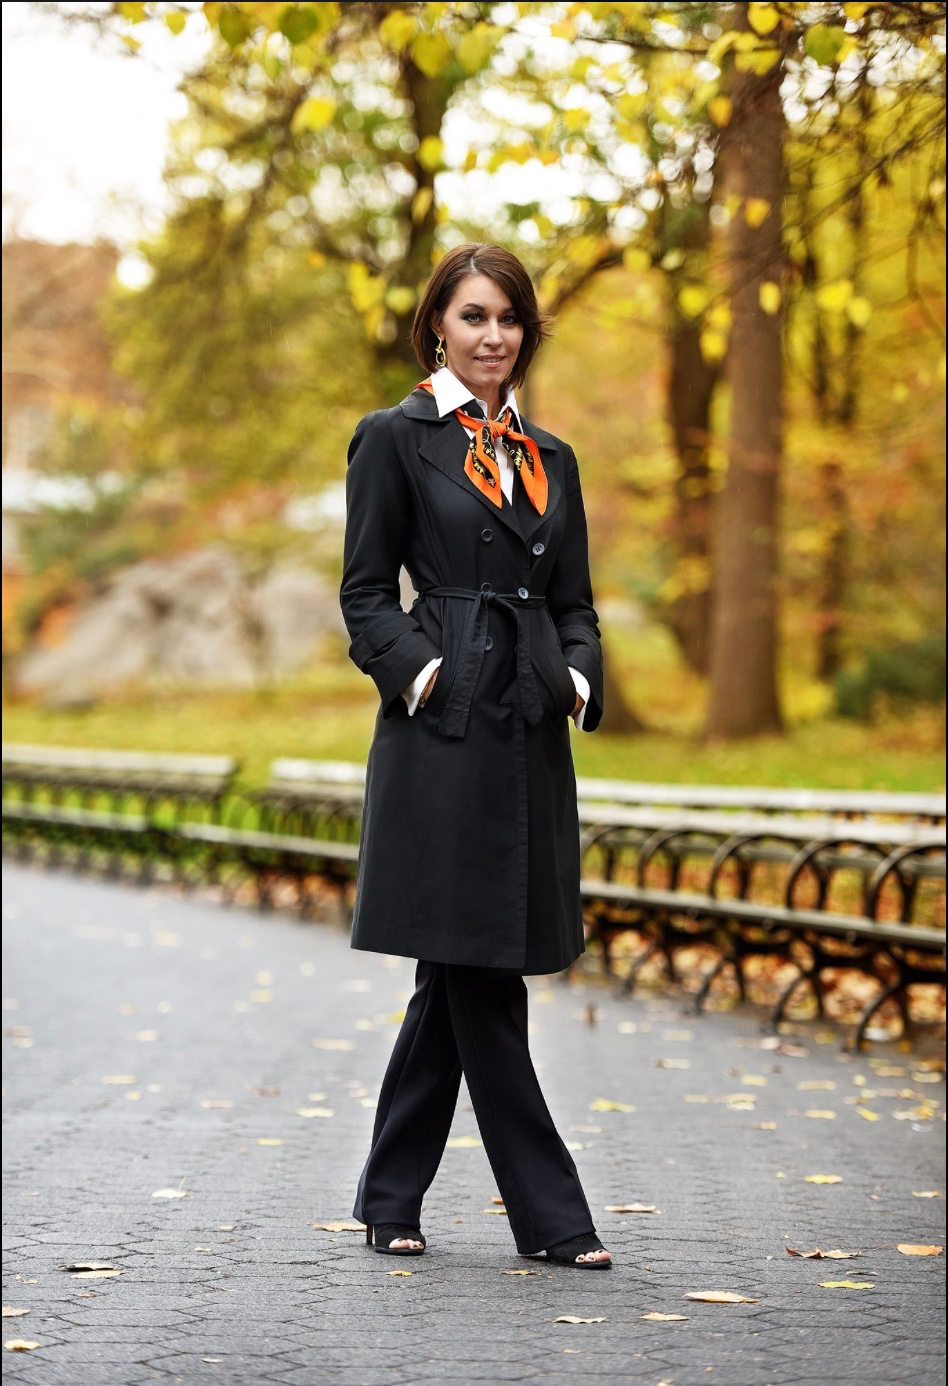 Woman wearing a black trench coat and an orange hermes scarf walking in central park in the fall